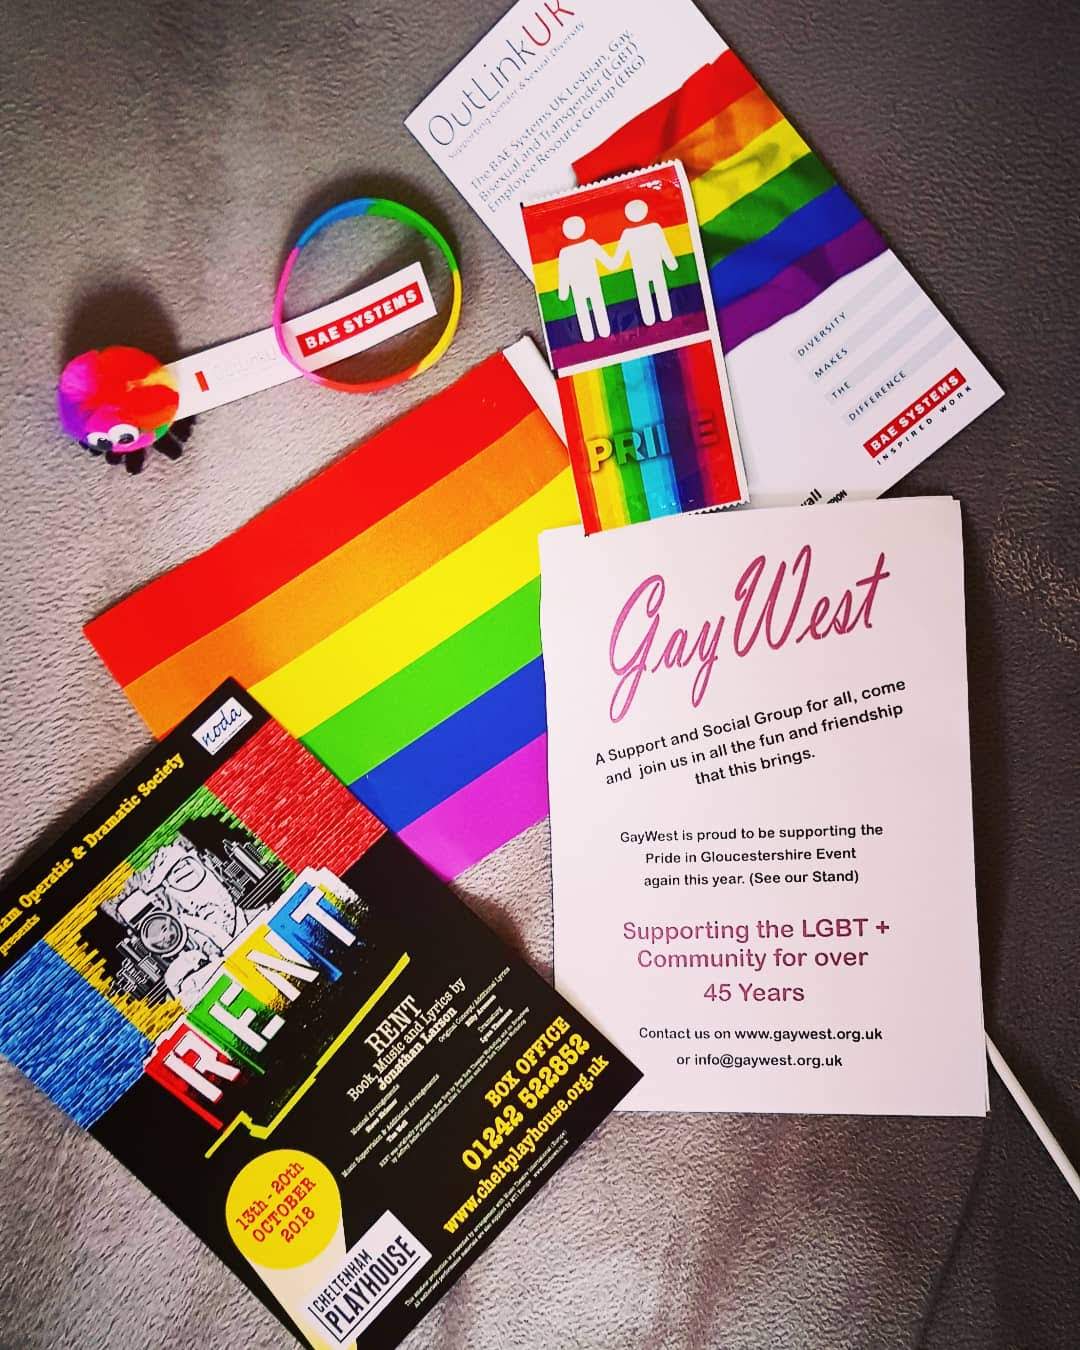 Love is love is love ~ Gloucester Pride, LGBTQ+ and the back lash received